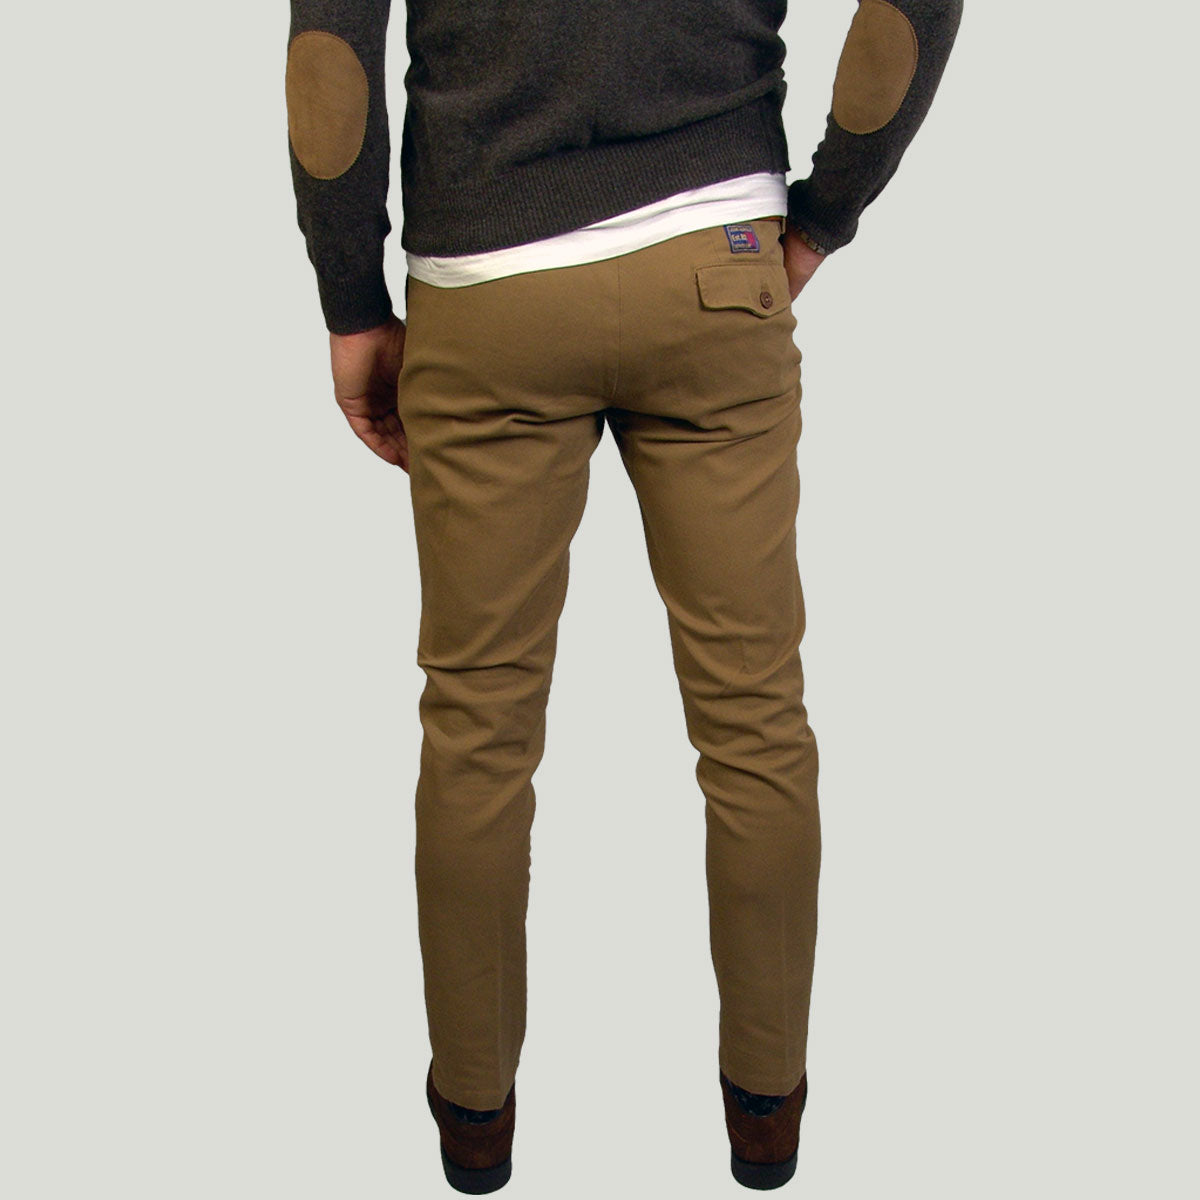 Cotton stretch Chino Pants for Man